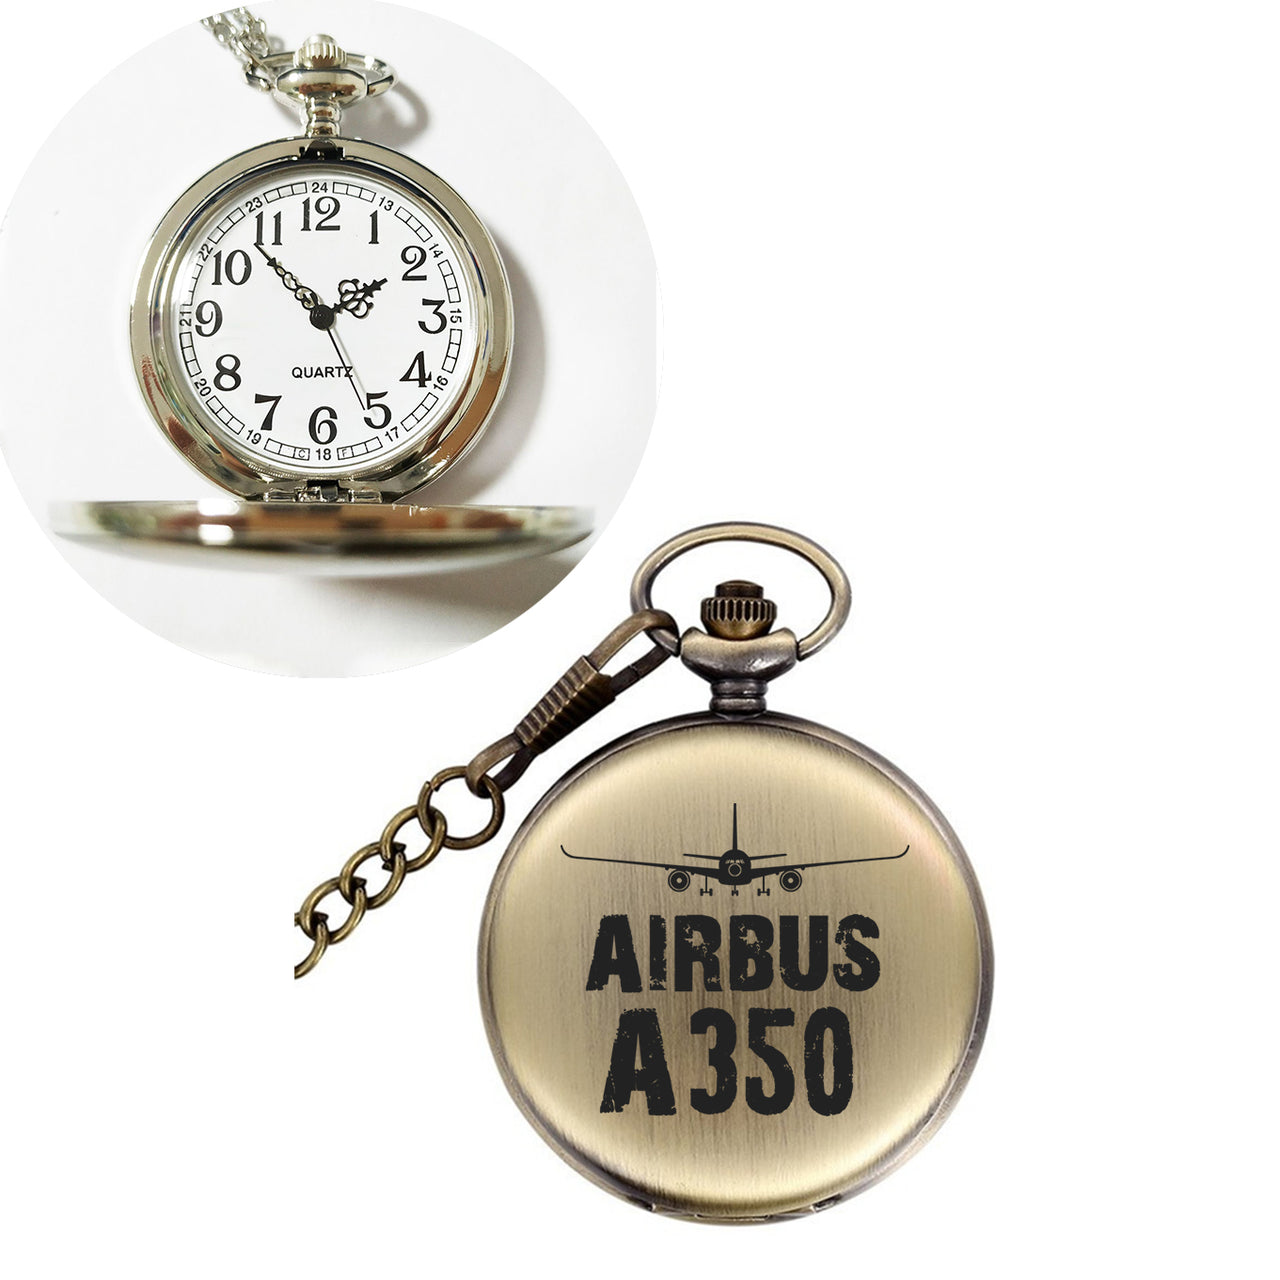 Airbus A350 & Plane Designed Pocket Watches